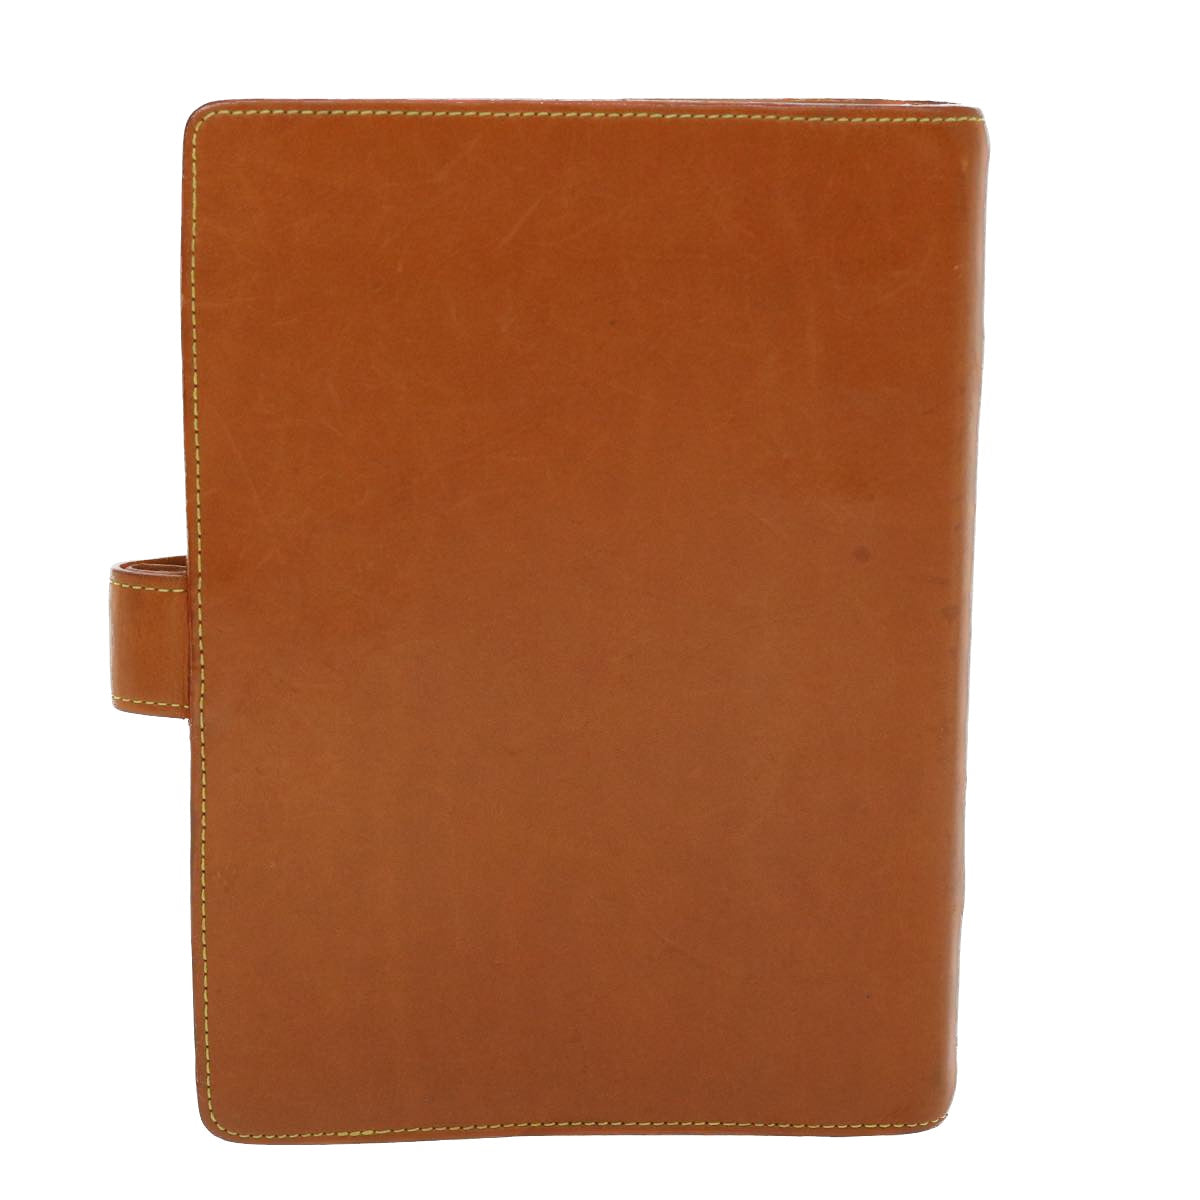 LOUIS VUITTON Nomad Leather Agenda MM Day Planner Cover Beige R20473 Auth 52294 - 0